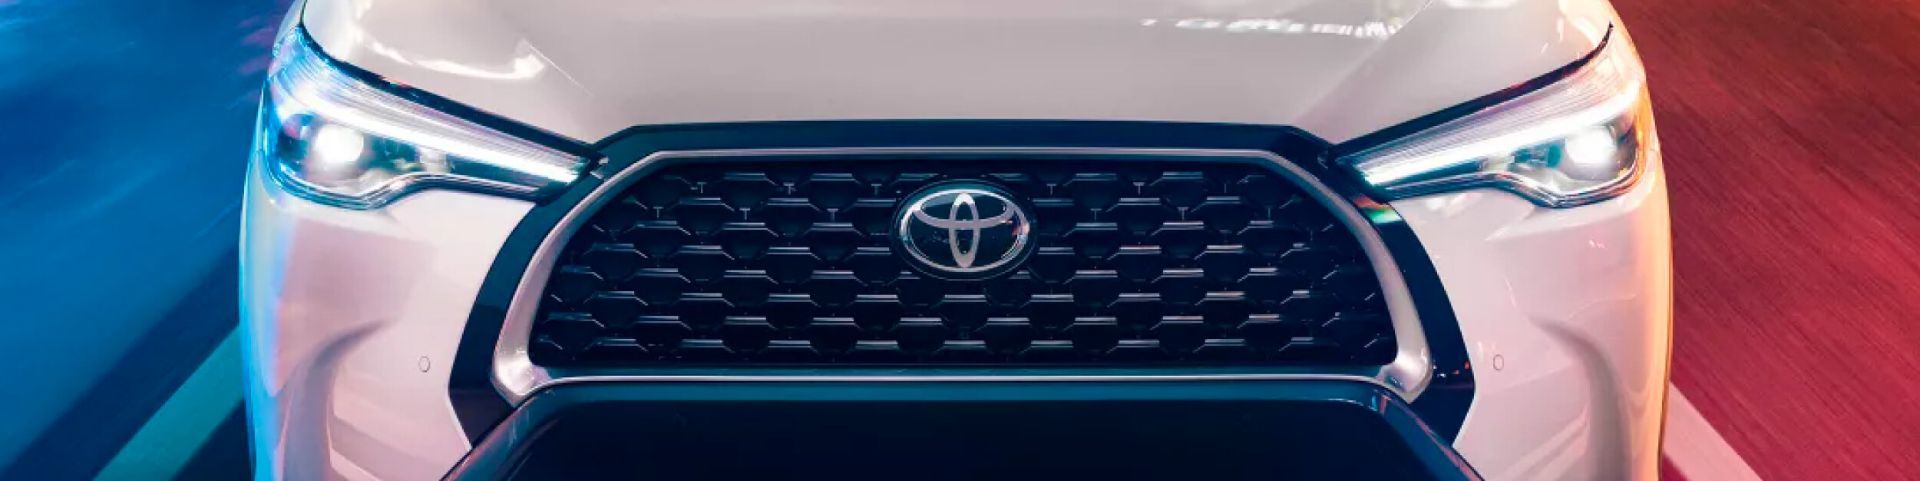 Toyota’s Compact SUVs And Crossover Lineup: Take Your Pick